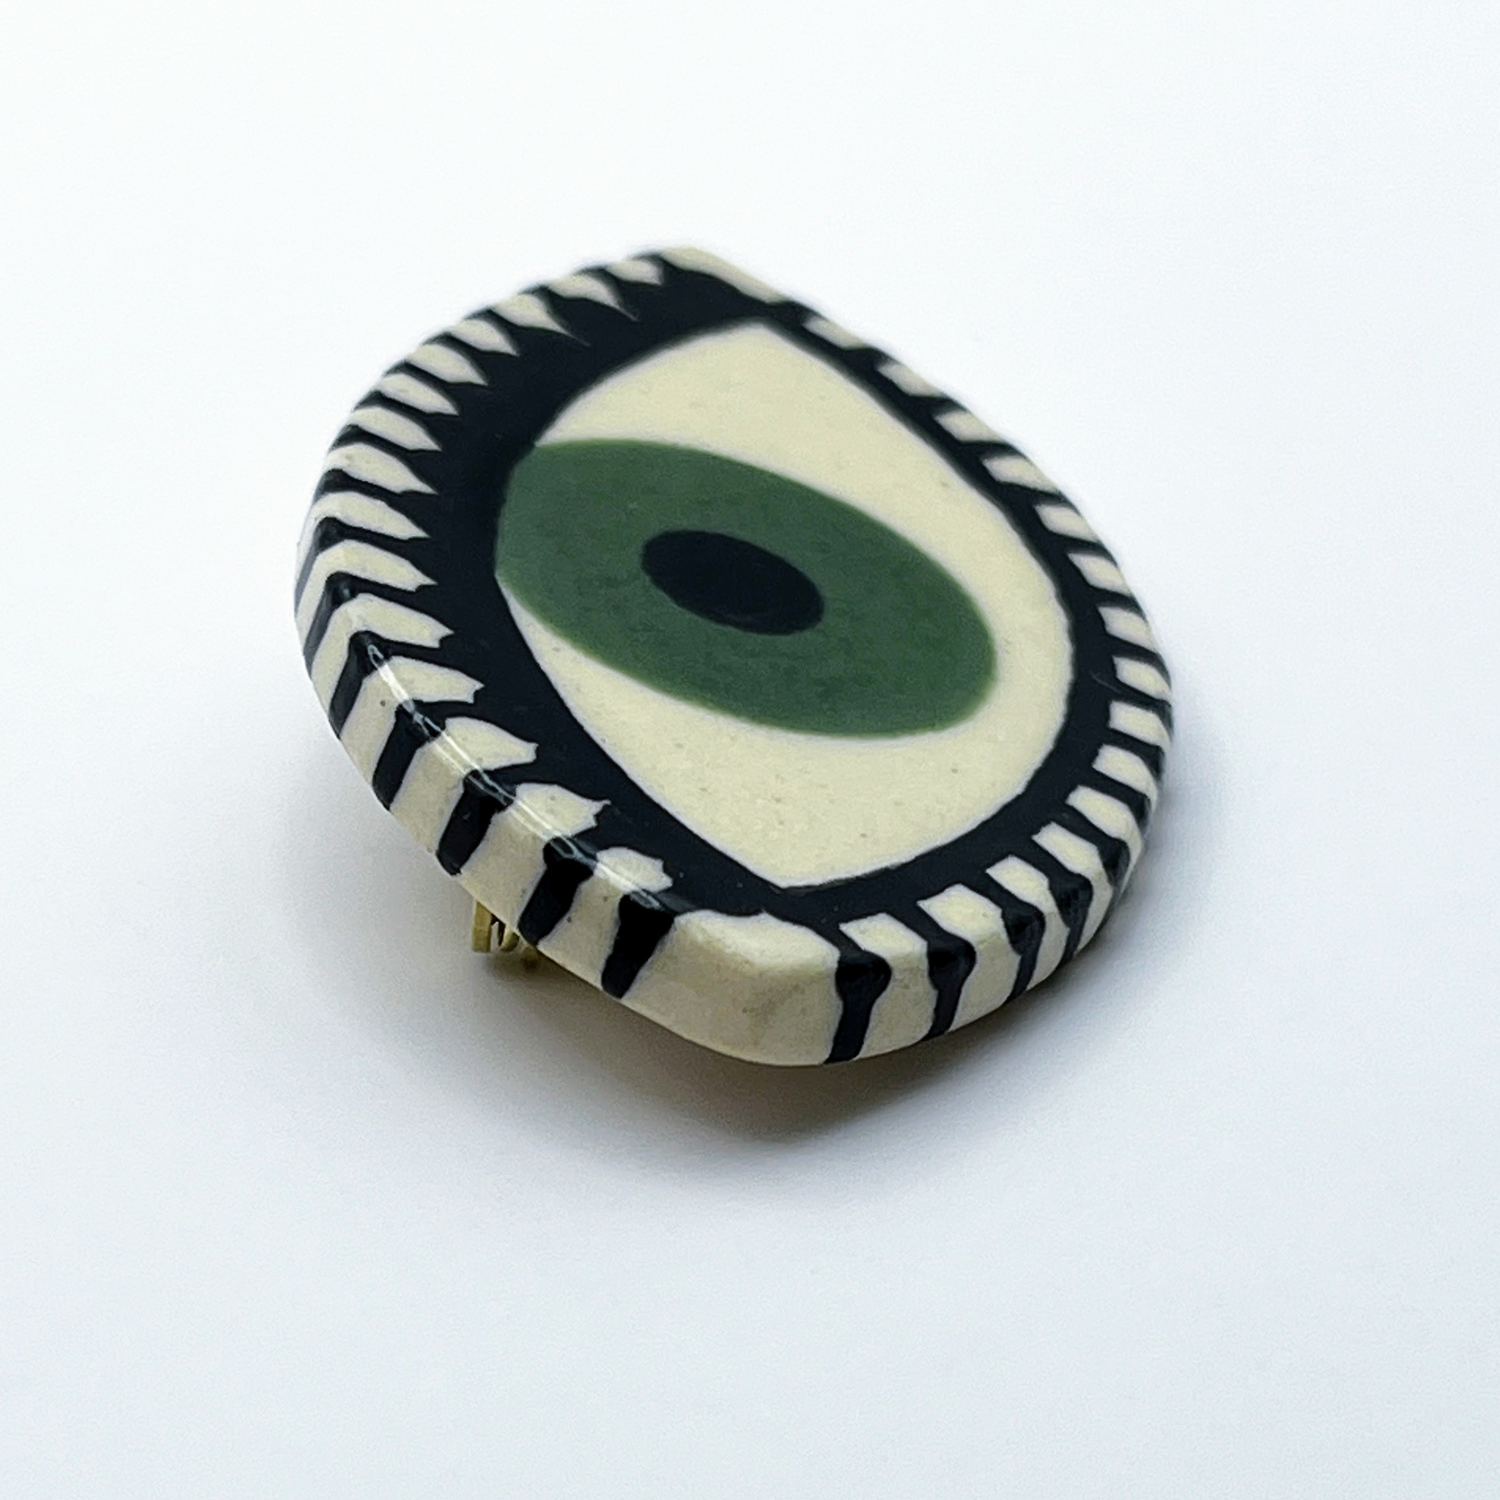 Here and Here: Green Eye Brooch with Straight Lashes Product Image 2 of 2